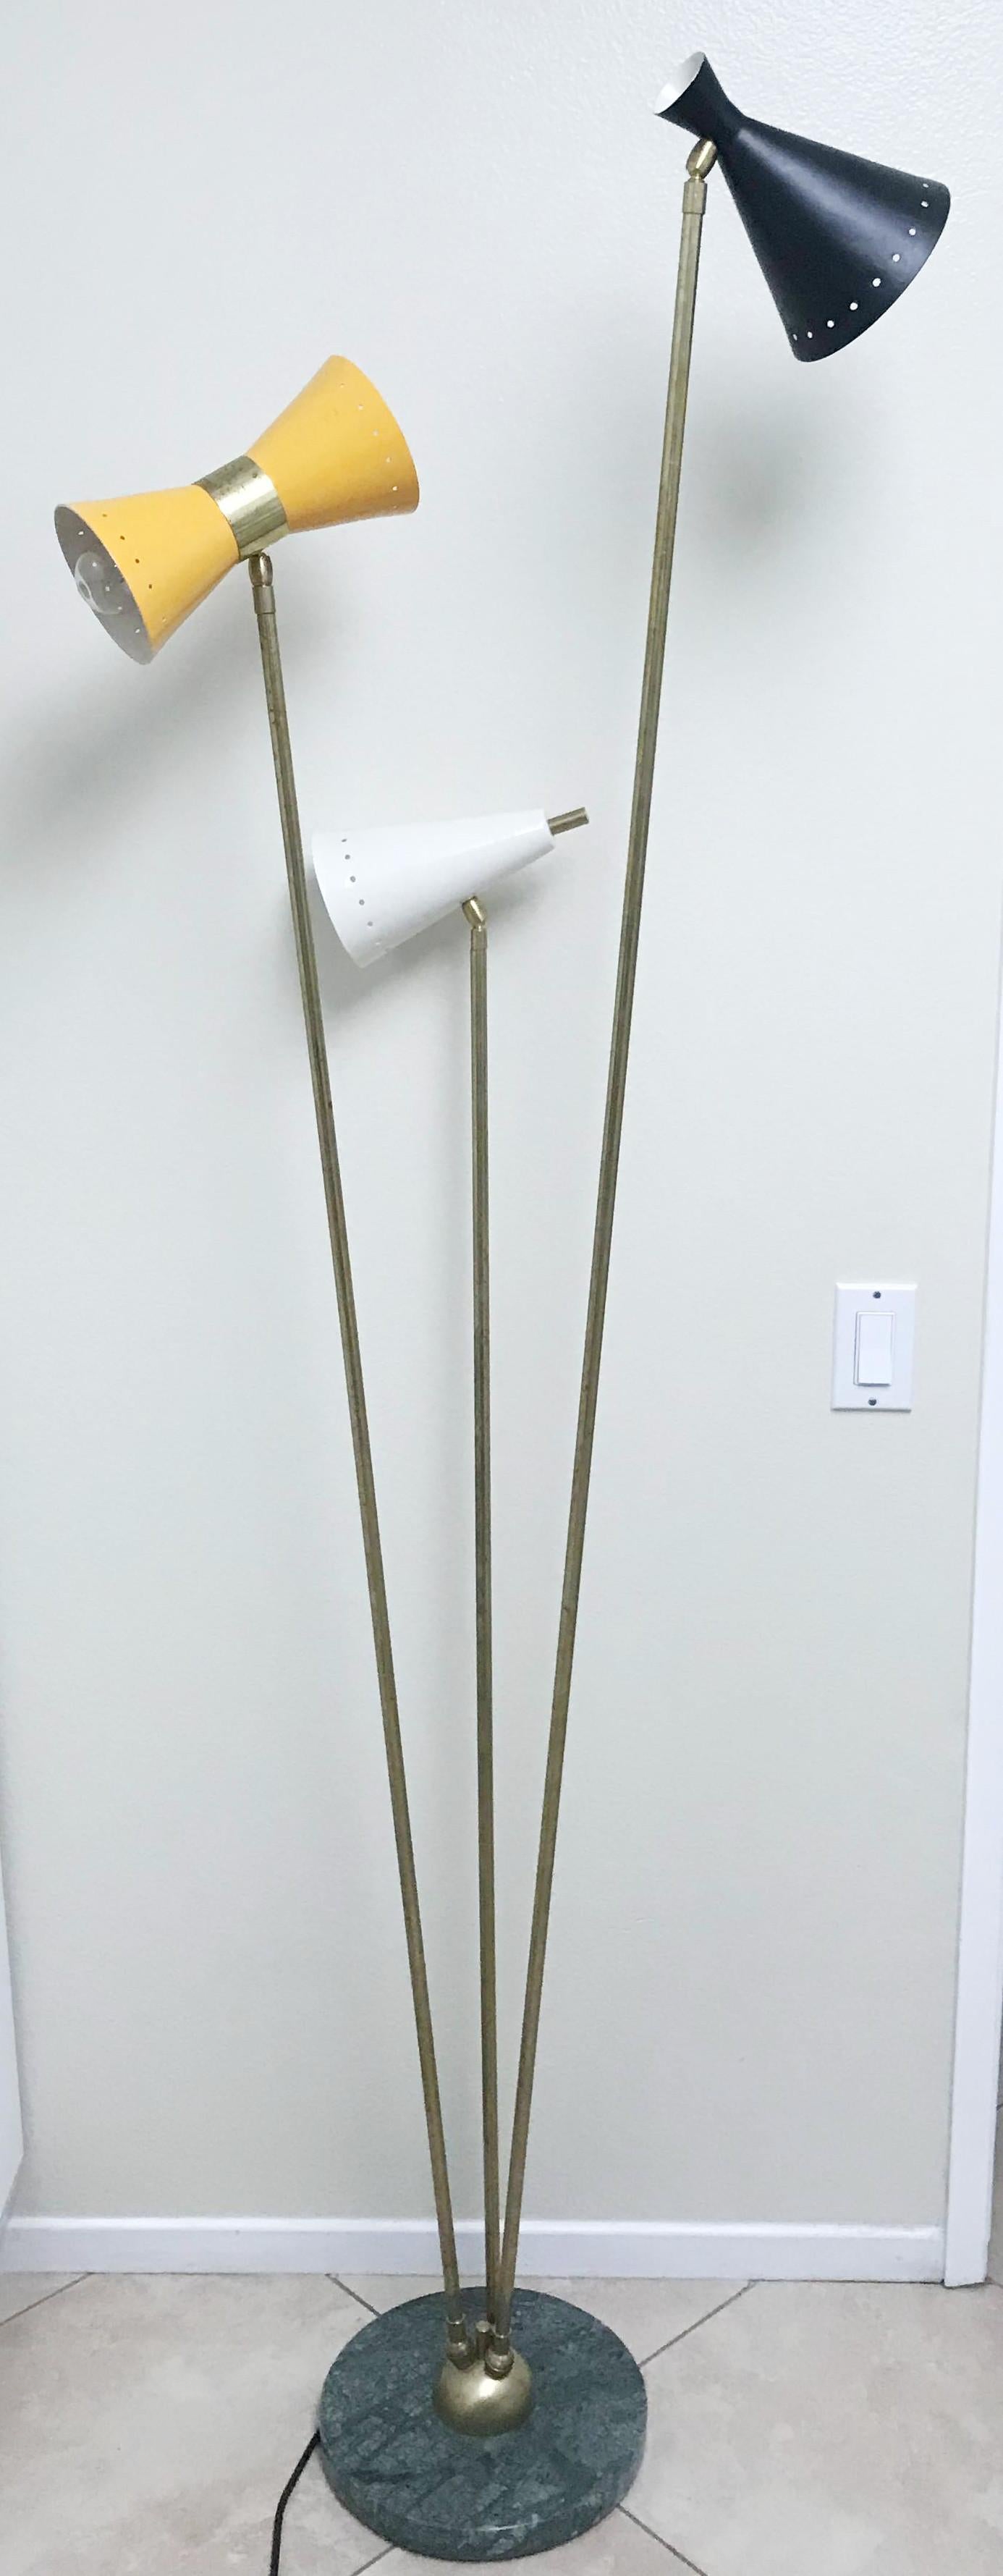 Vintage floor lamp in the style of Stilnovo, with orange enamel, matte black, and white enamel shades on marble base, minor imperfections on the shades / made in Italy.
4 lights / 2 in E26 type and 2 in E12 type / max 40W each.
Measures: Height: 74